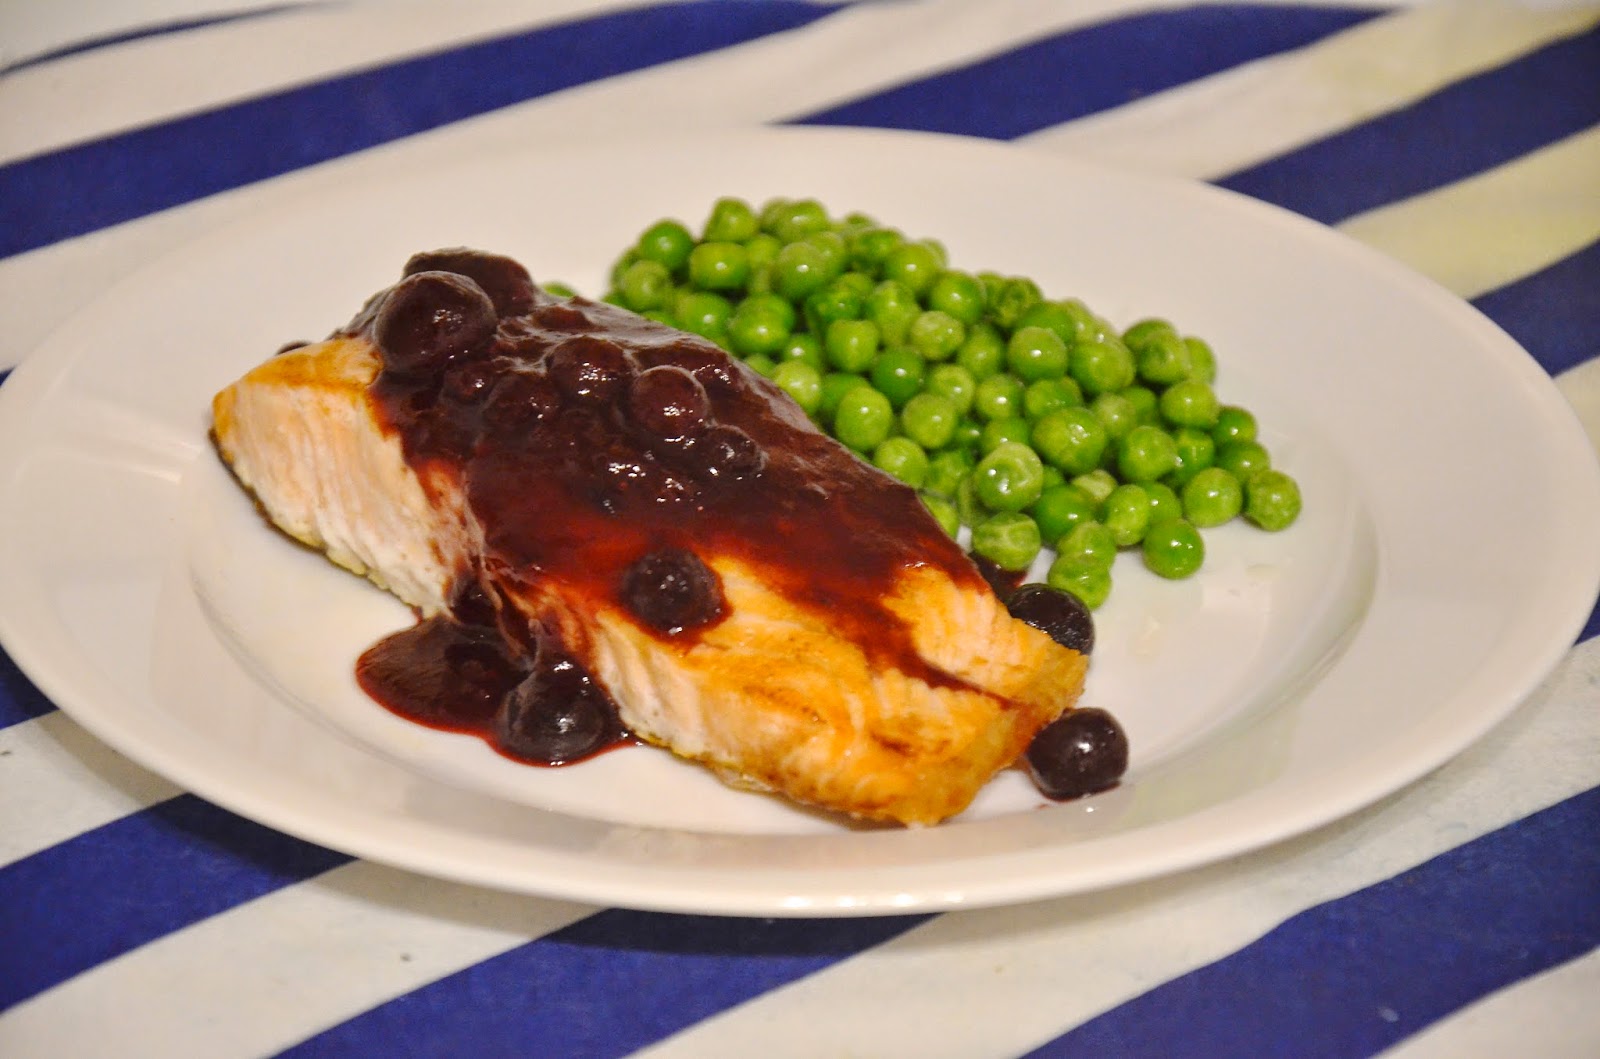 Stuff We Ate: Salmon with Blueberry BBQ Sauce